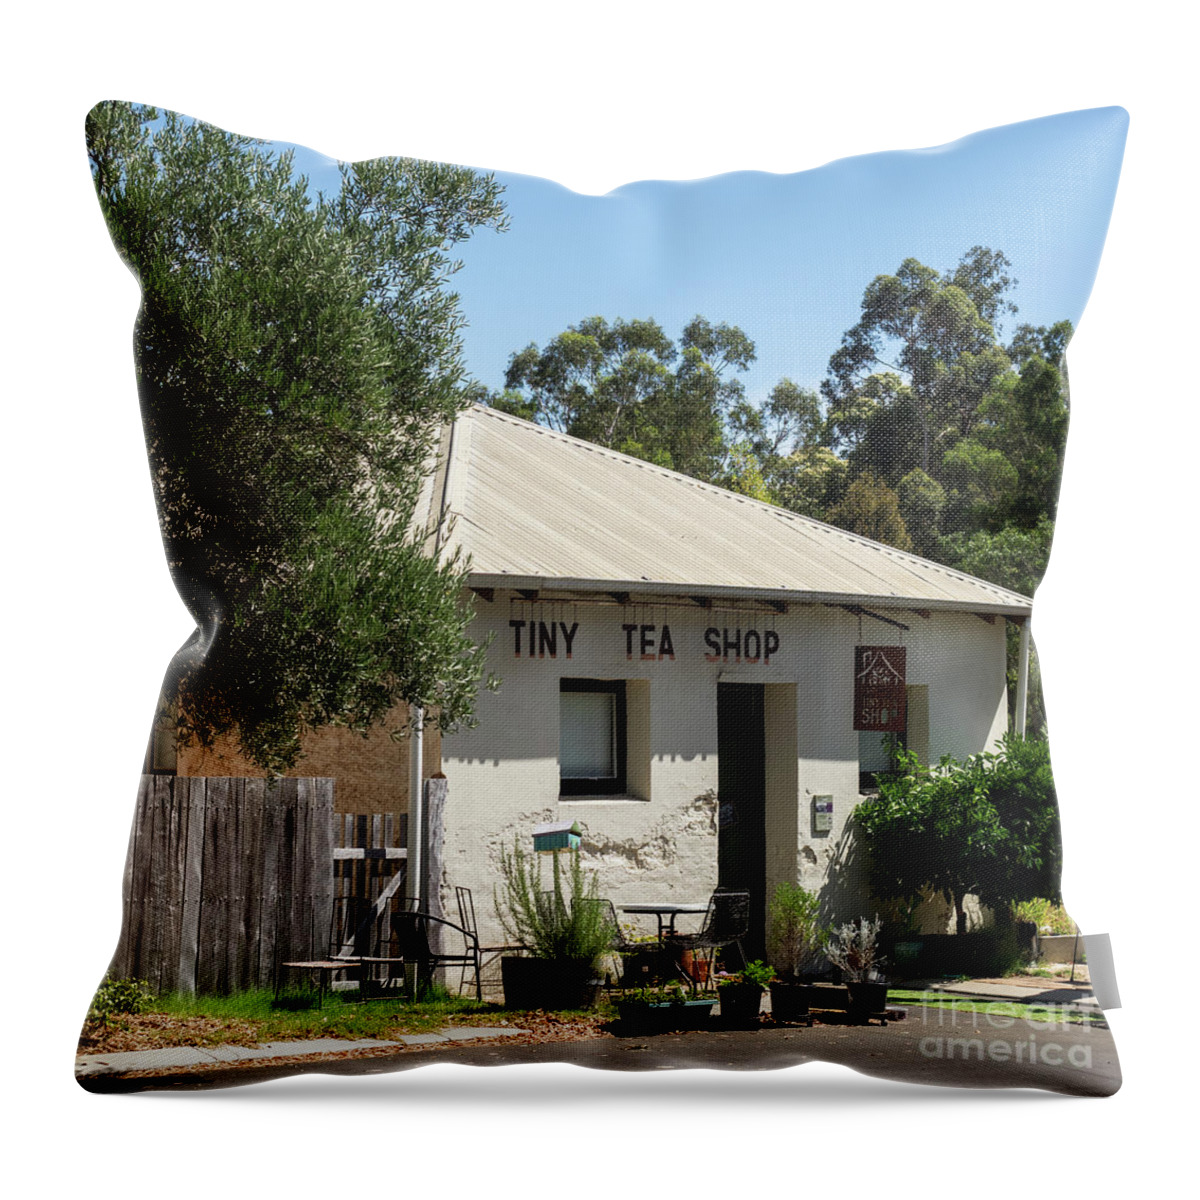 Australia Throw Pillow featuring the photograph Nannup Tiny Tea Shop 01 by Rick Piper Photography